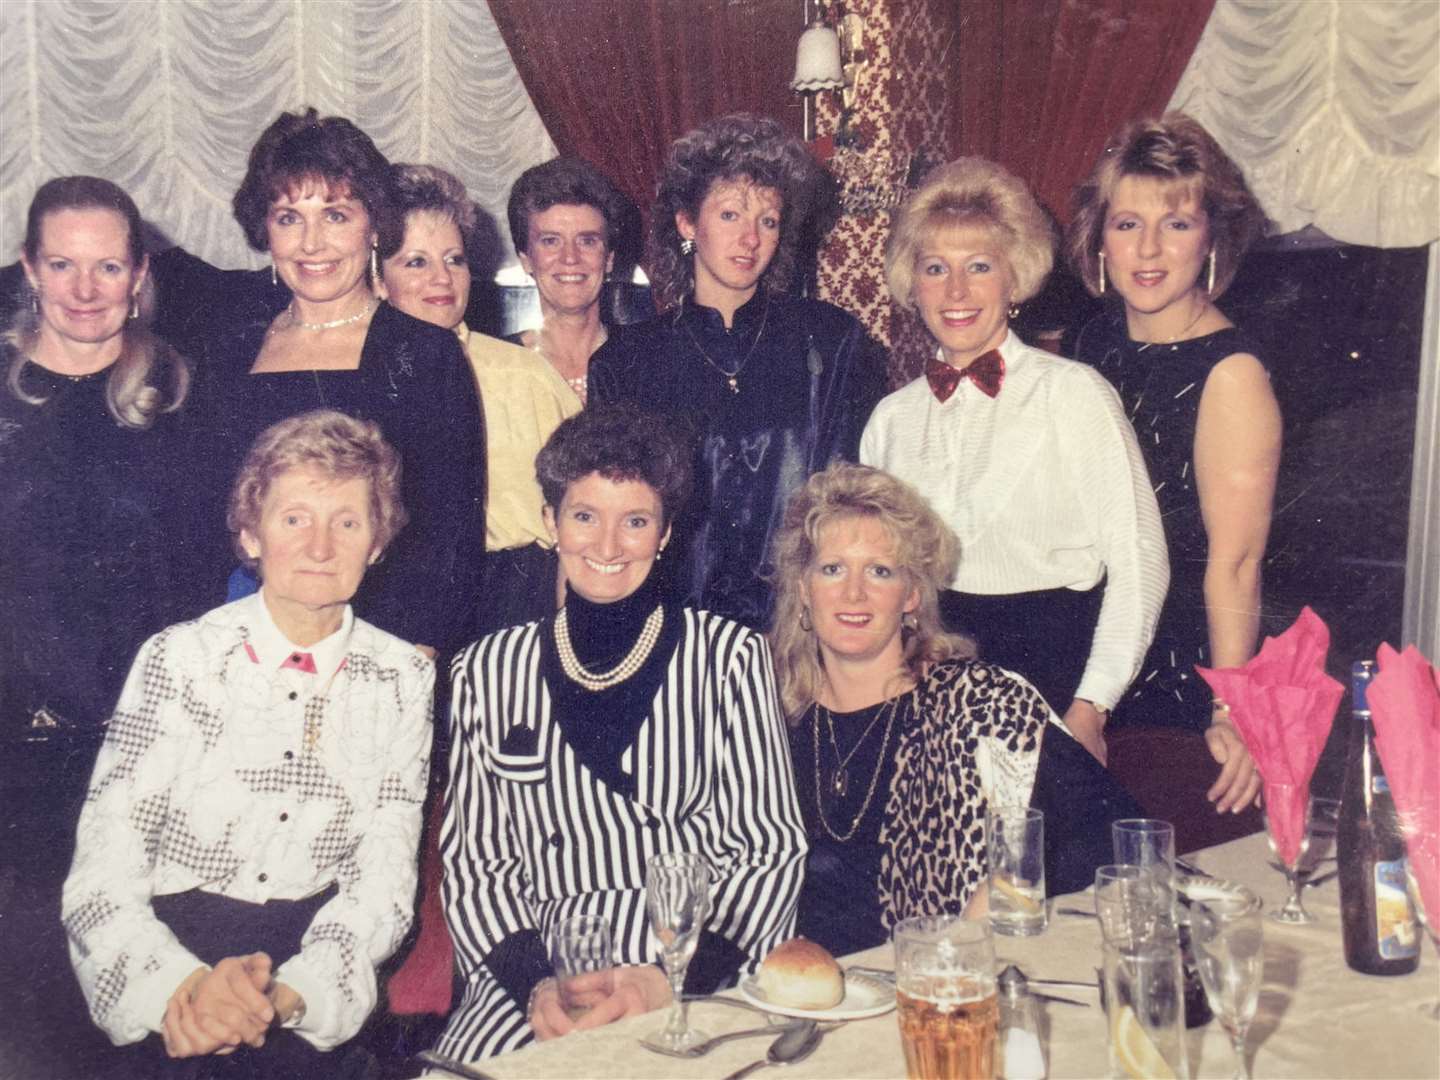 There have been 15 staff over the years at Hair Care